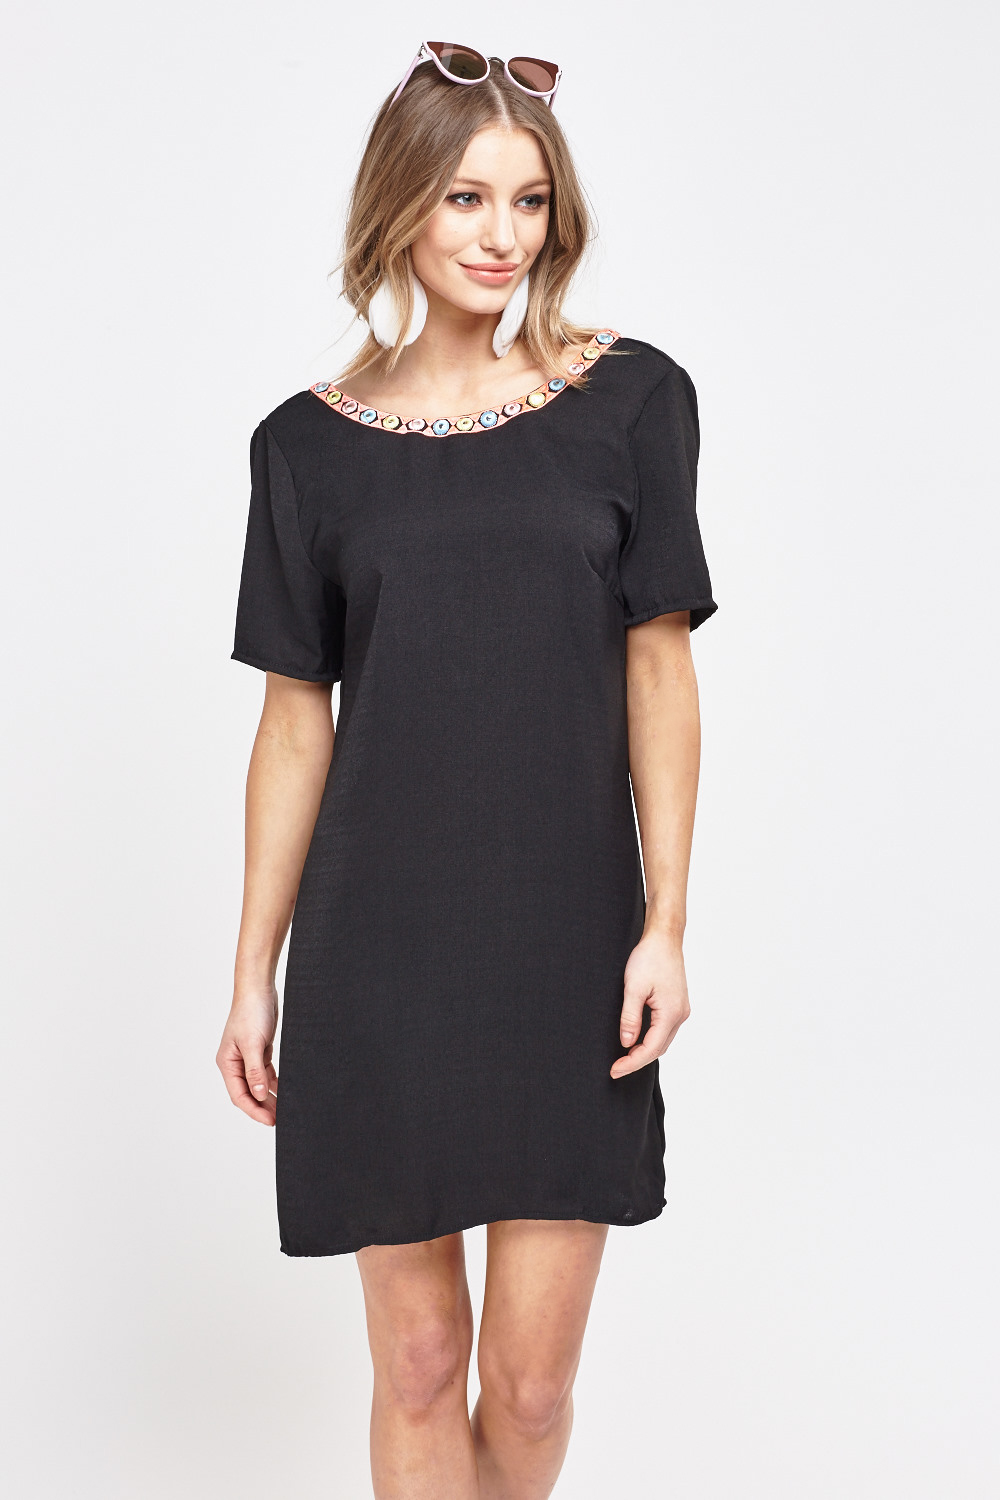 Embroidered Trim Shift Dress - Just $3